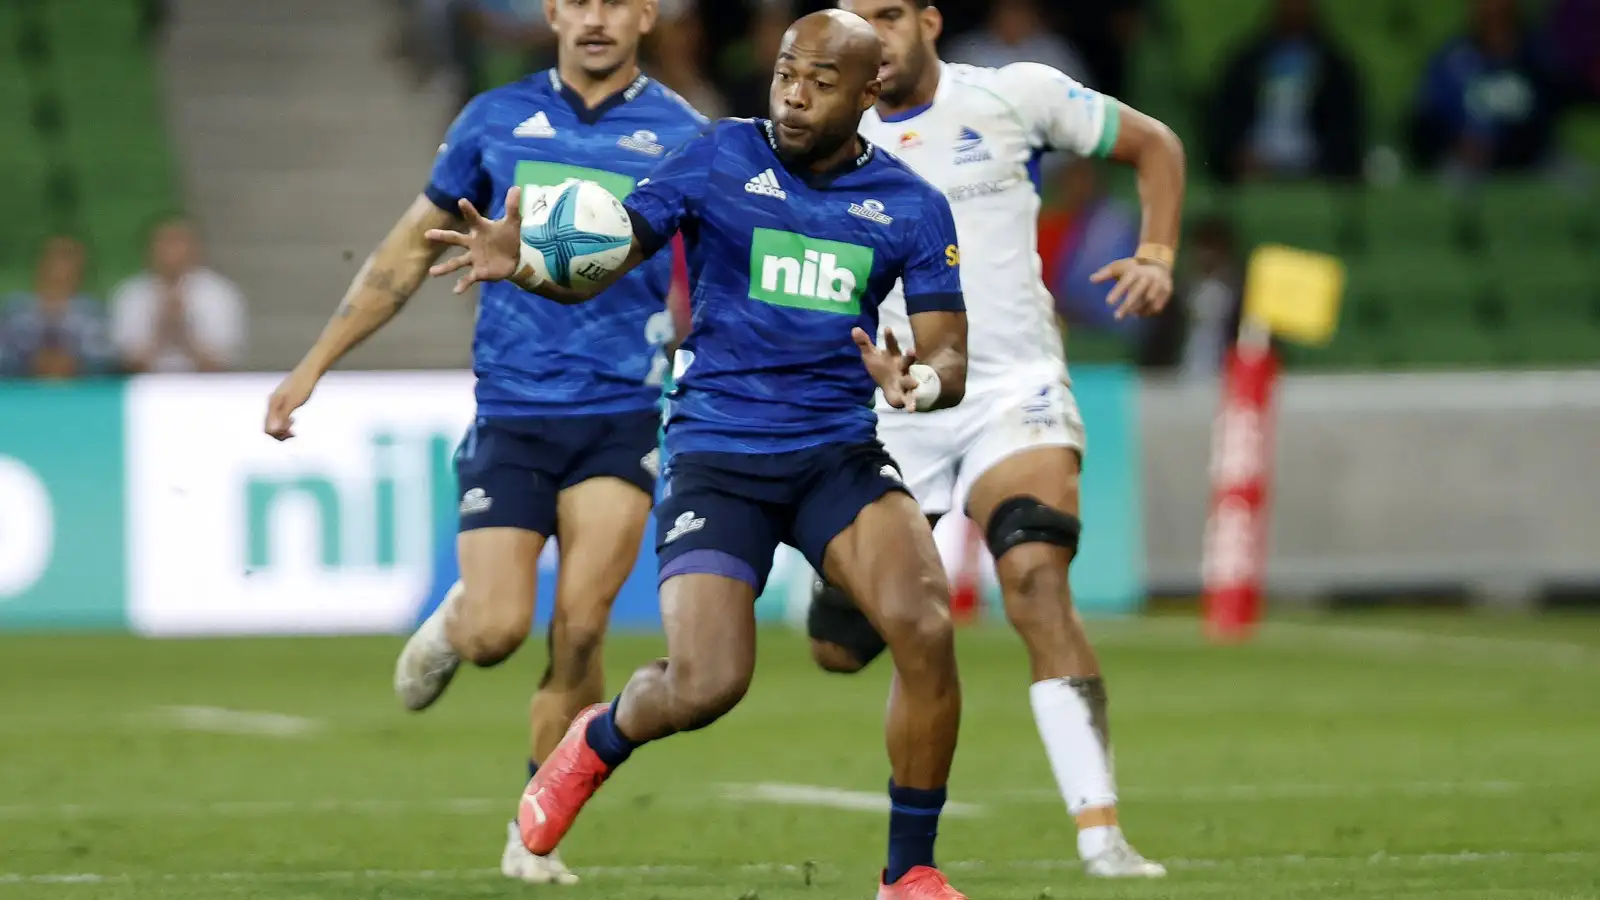 Super Rugby Pacific: Mark Telea collects the ball during a game